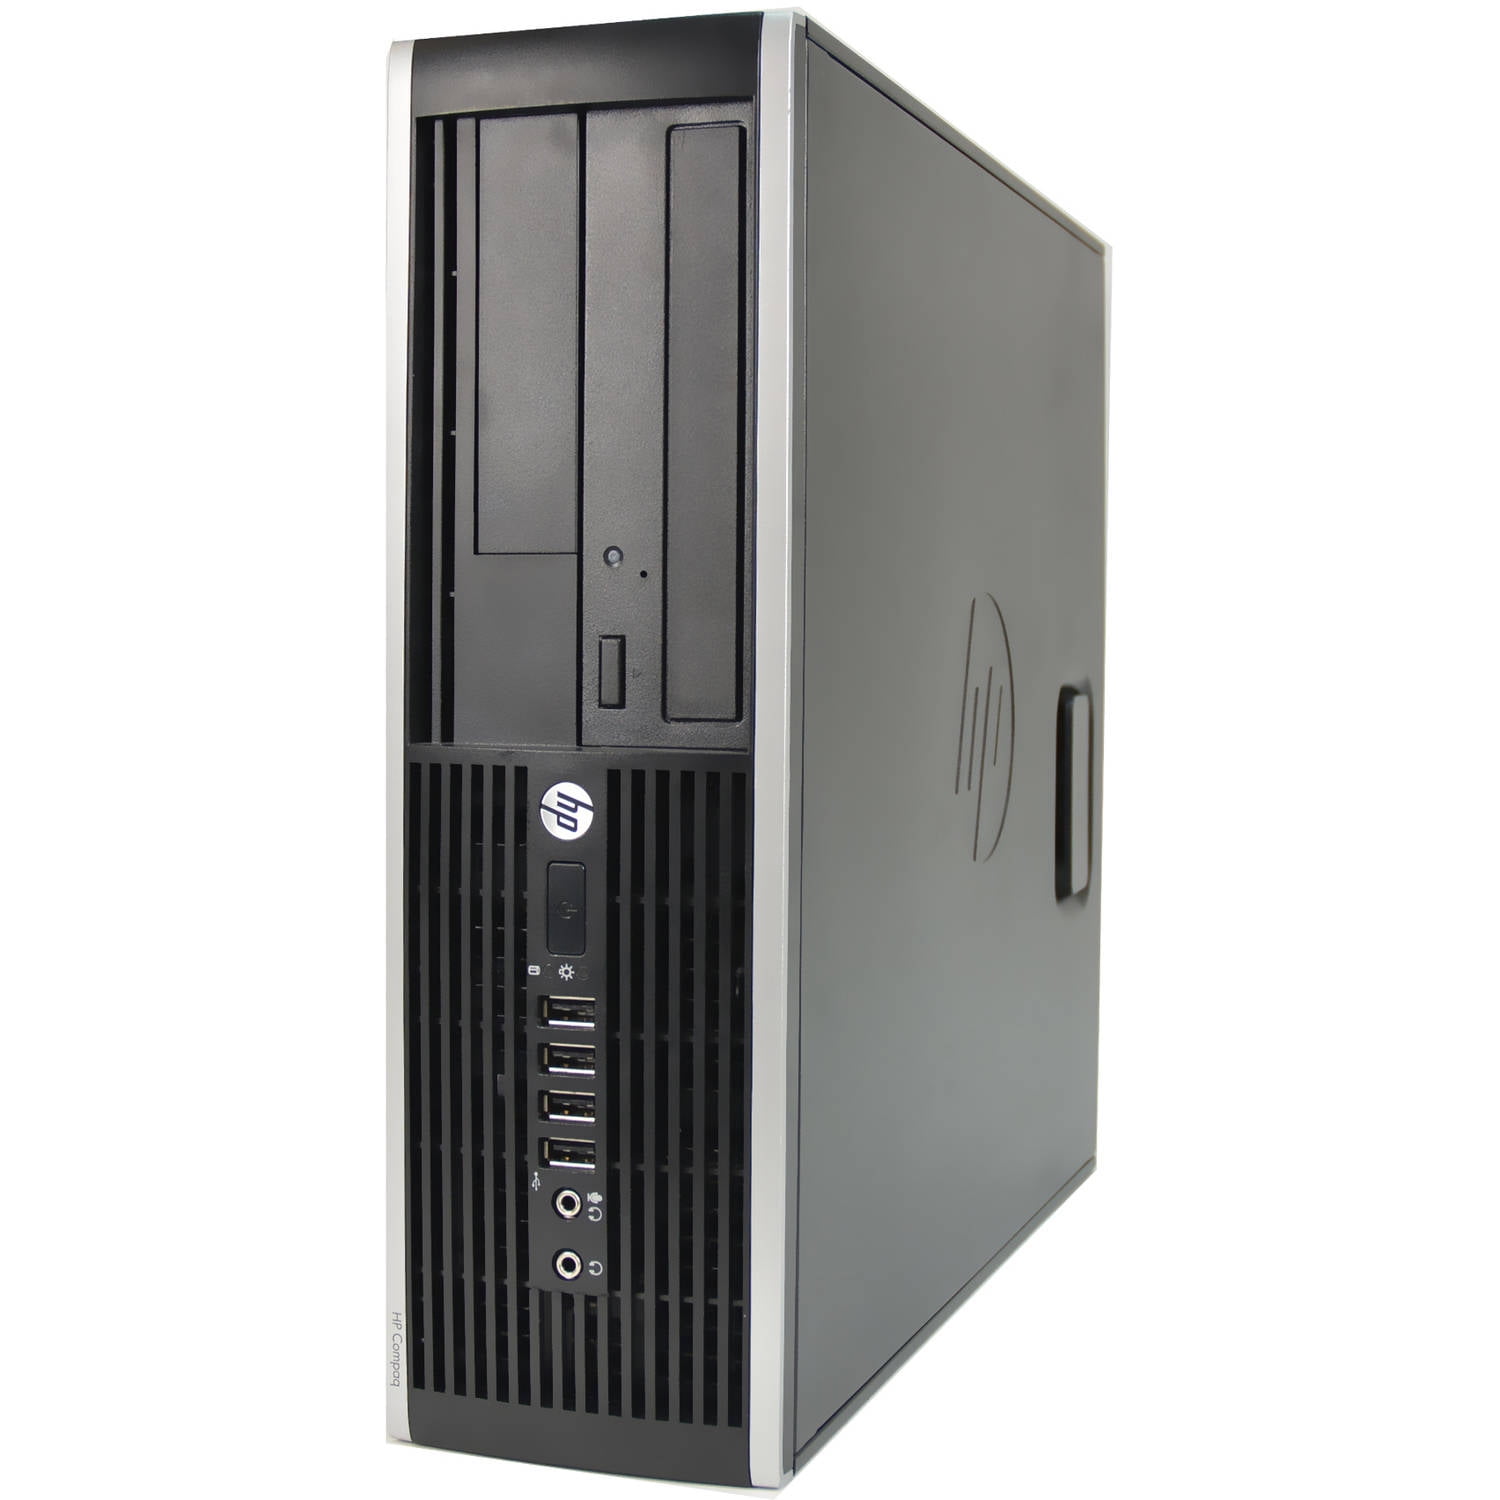 Used HP Compaq 8000 Small Form Factor Desktop PC with Intel 2 Duo Processor, 4GB Memory, 500GB Hard Drive and Windows 10 Pro (Monitor Not Included) - Walmart.com